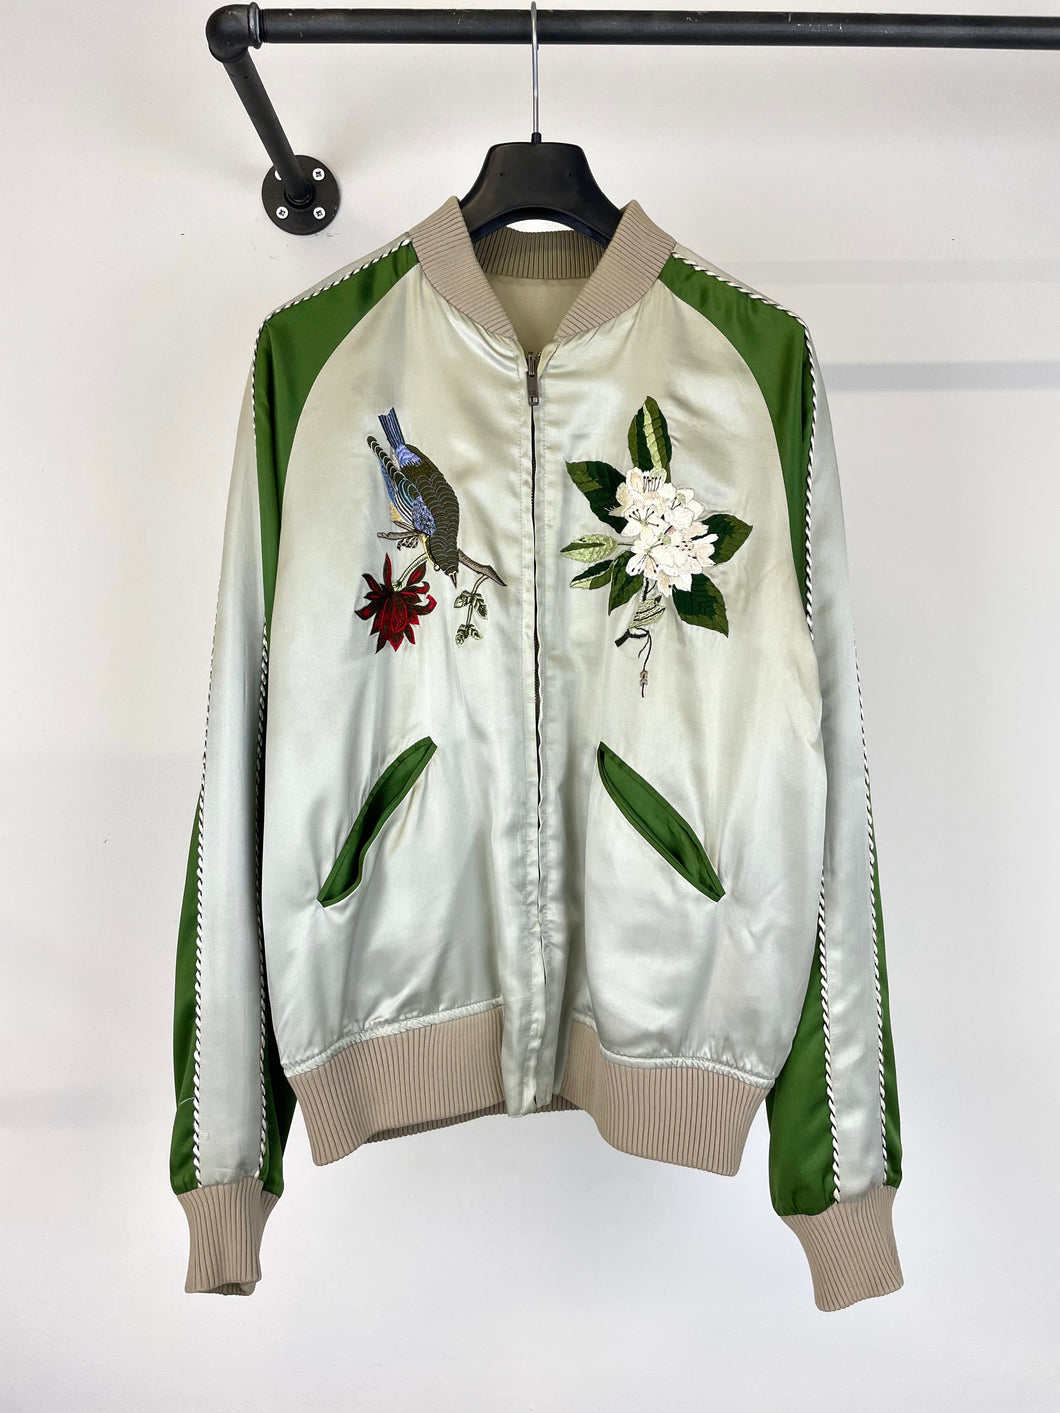 SS2003 Gucci by Tom ford Shunga bomber jacket